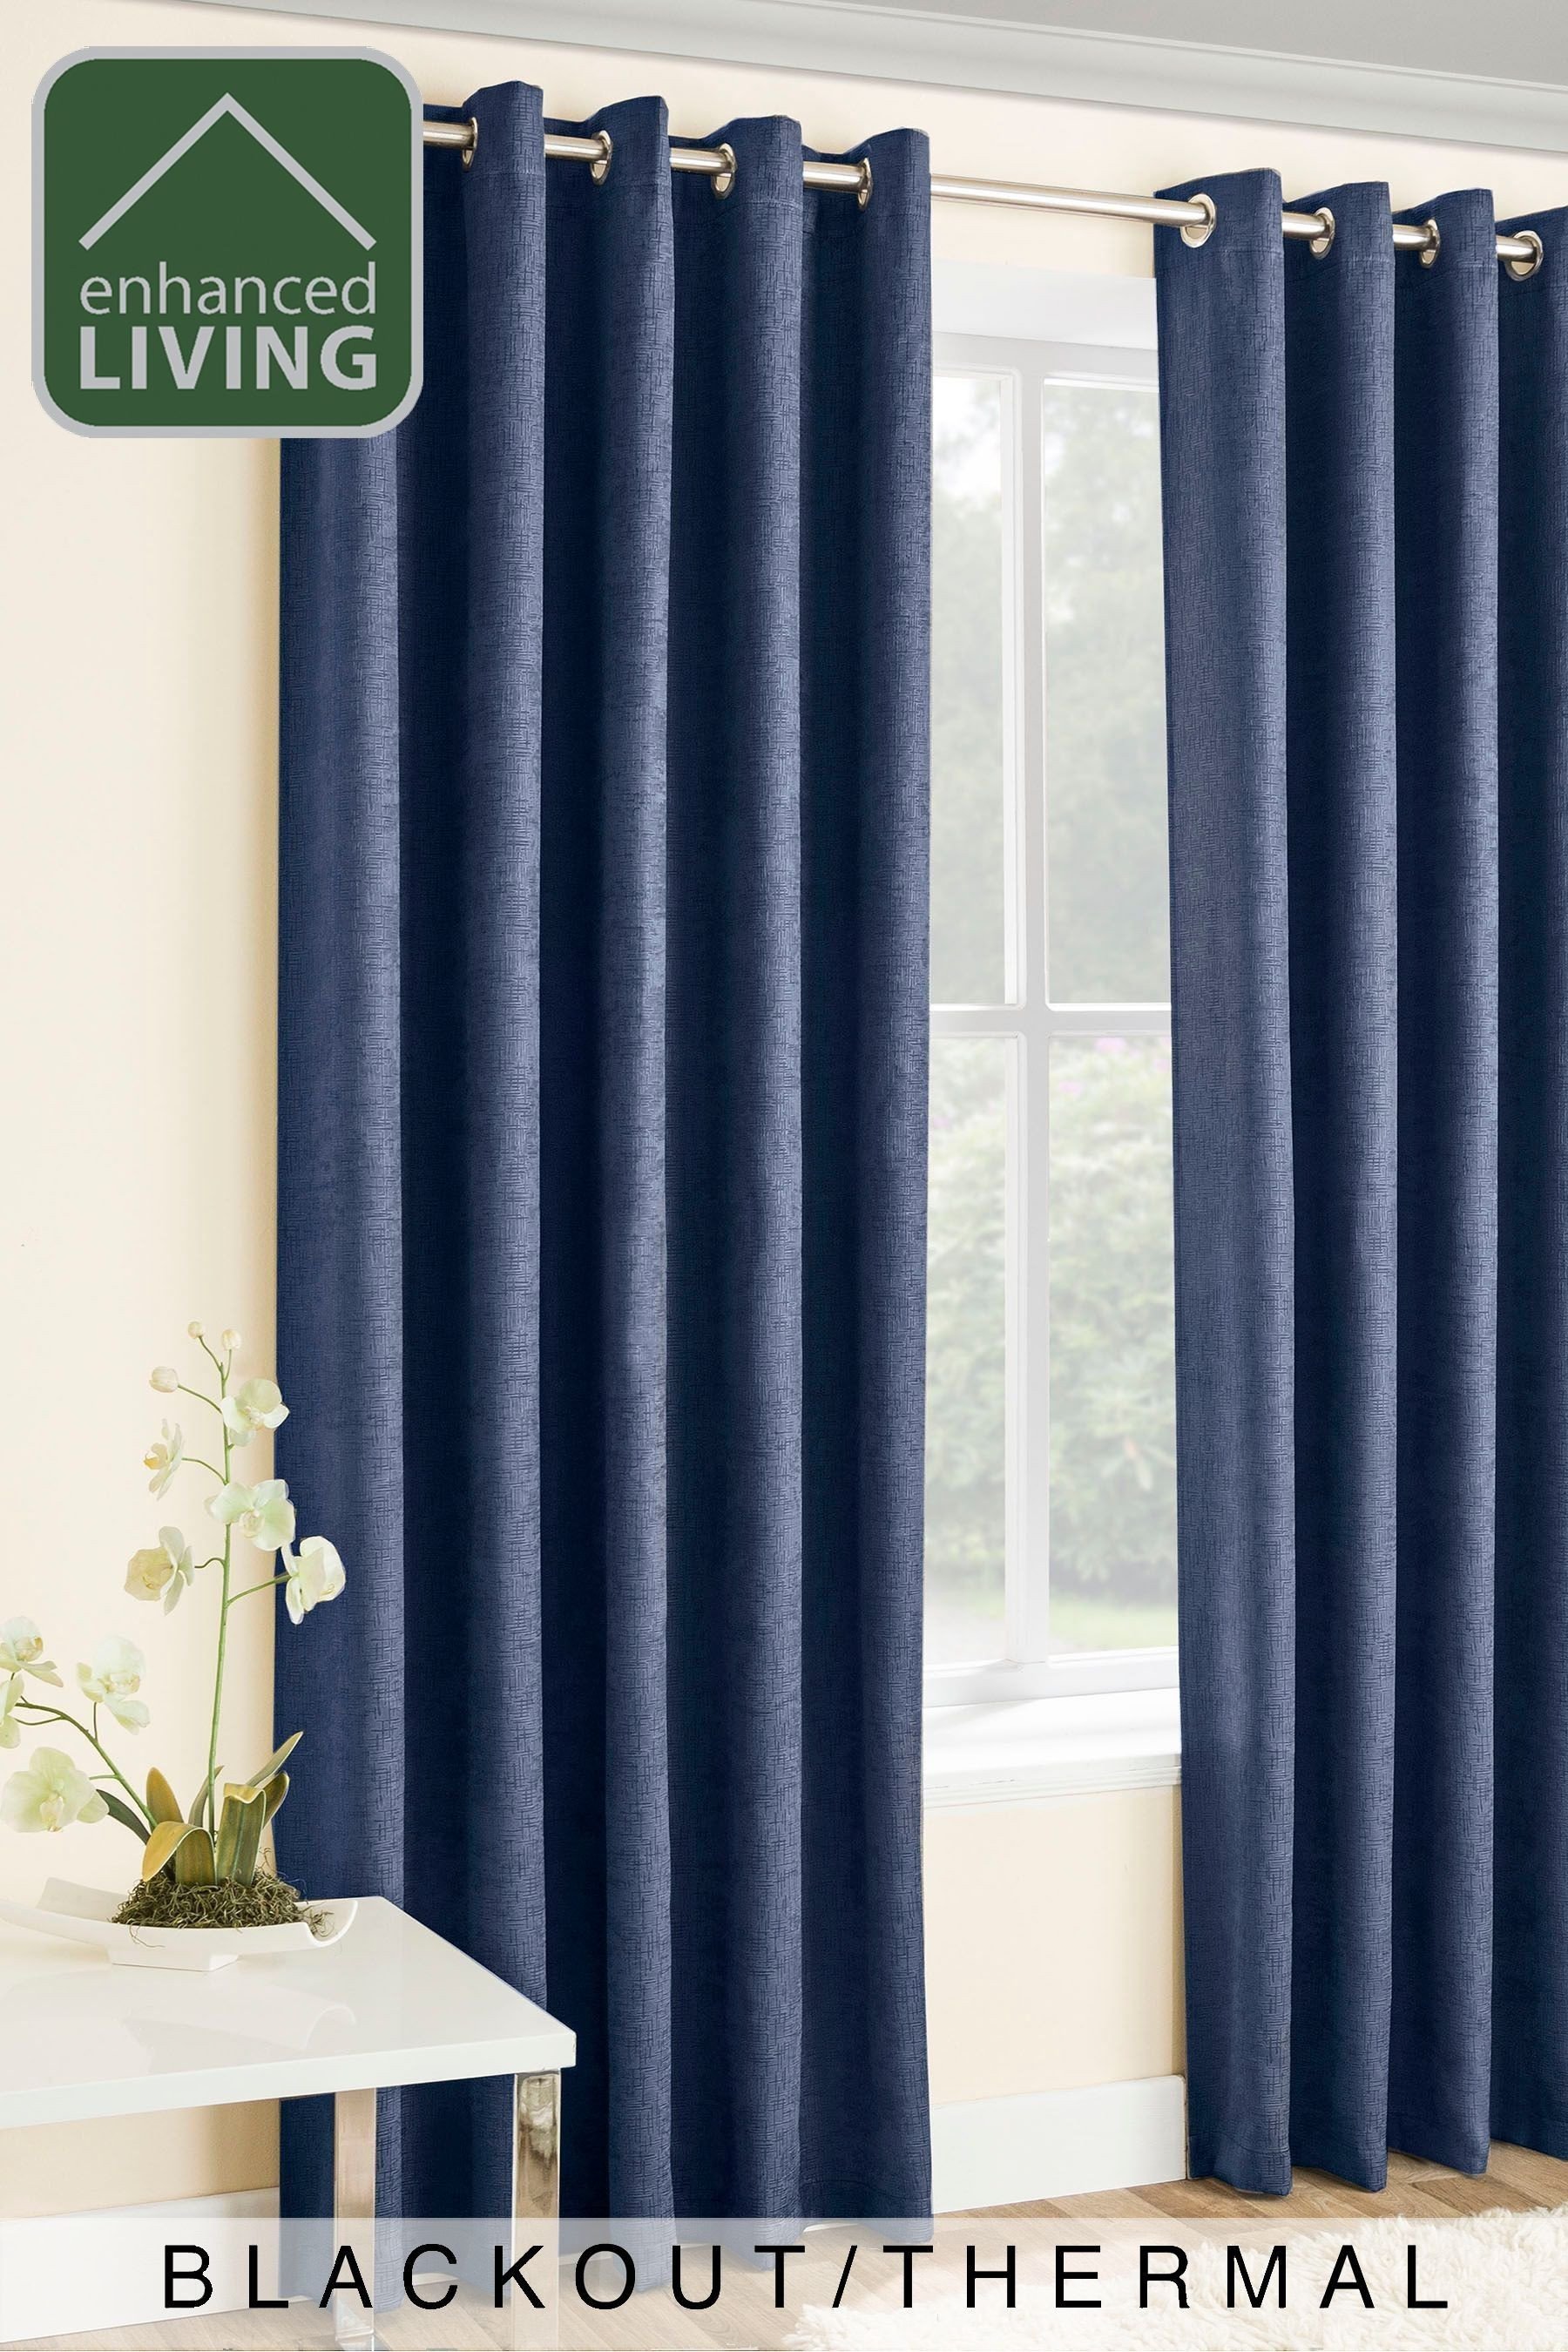 Black Curtains for Bedroom Luxury Enhanced Living Lined thermal Blackout Curtains